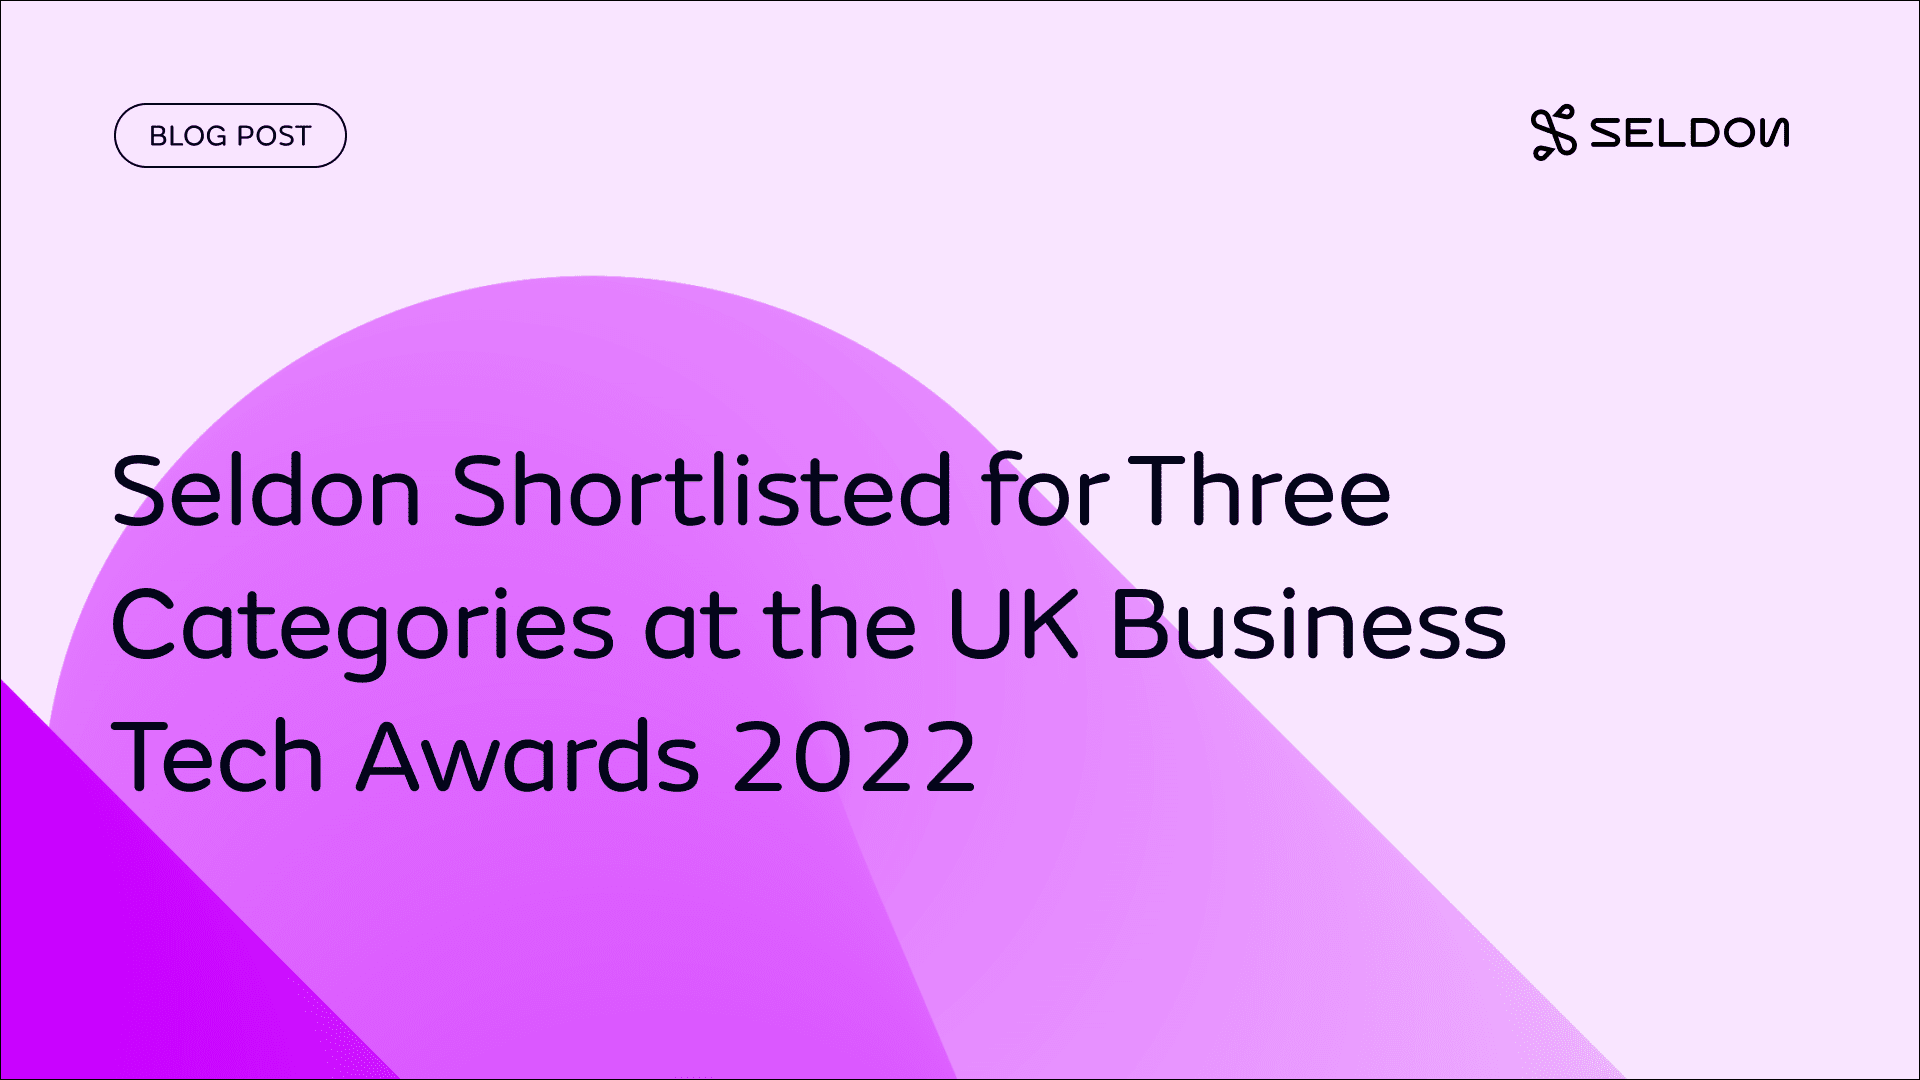 Seldon shortlisted for Three categories at the UK Business Tech Awards 2022